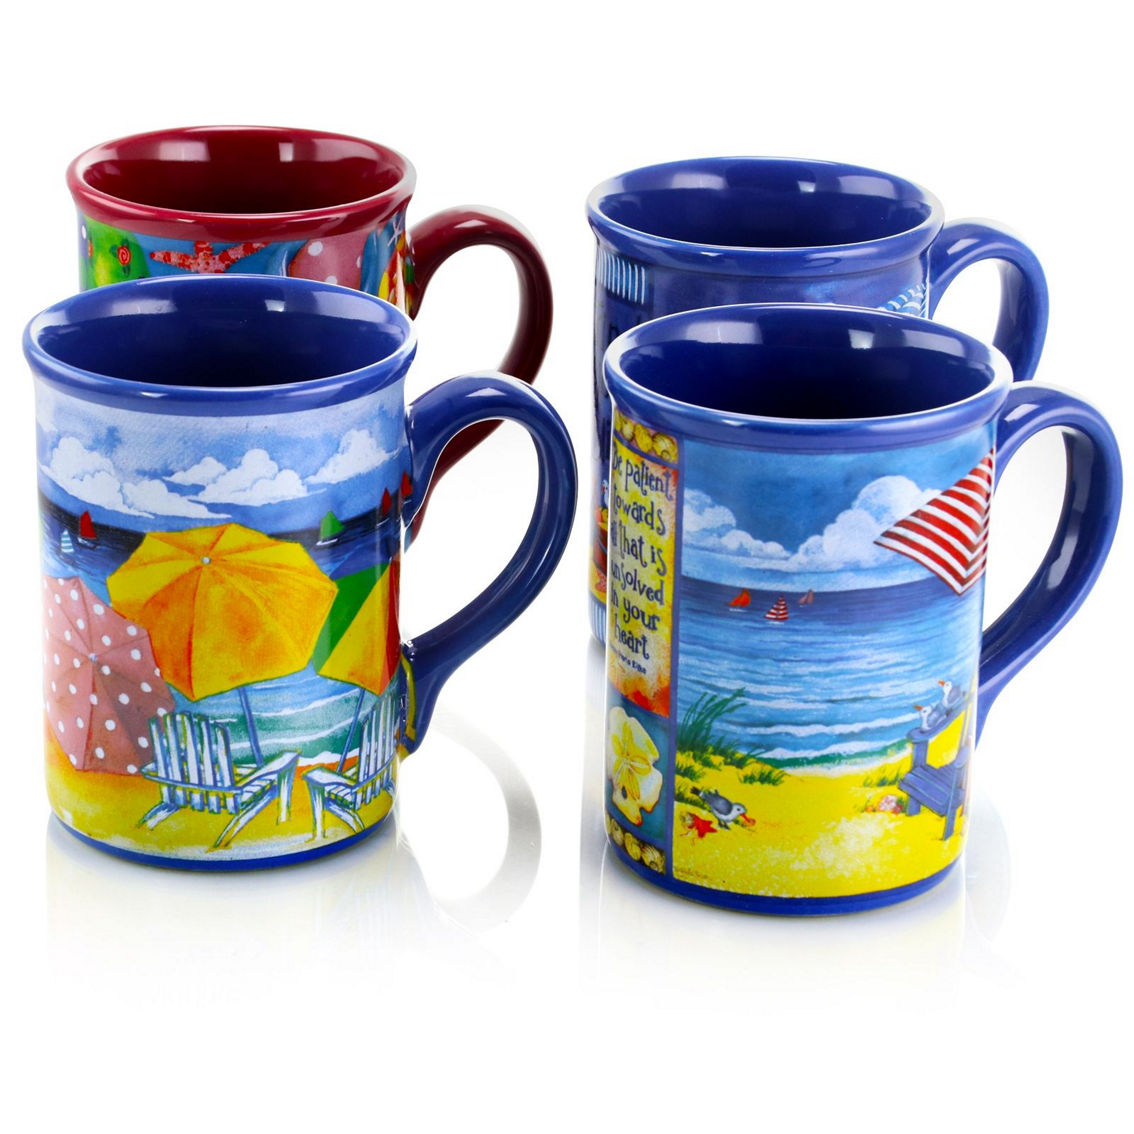 Gibson Home Beachcomber 4 Piece 16 Ounce Stoneware Mug Set in Assorted Designs - Image 4 of 5